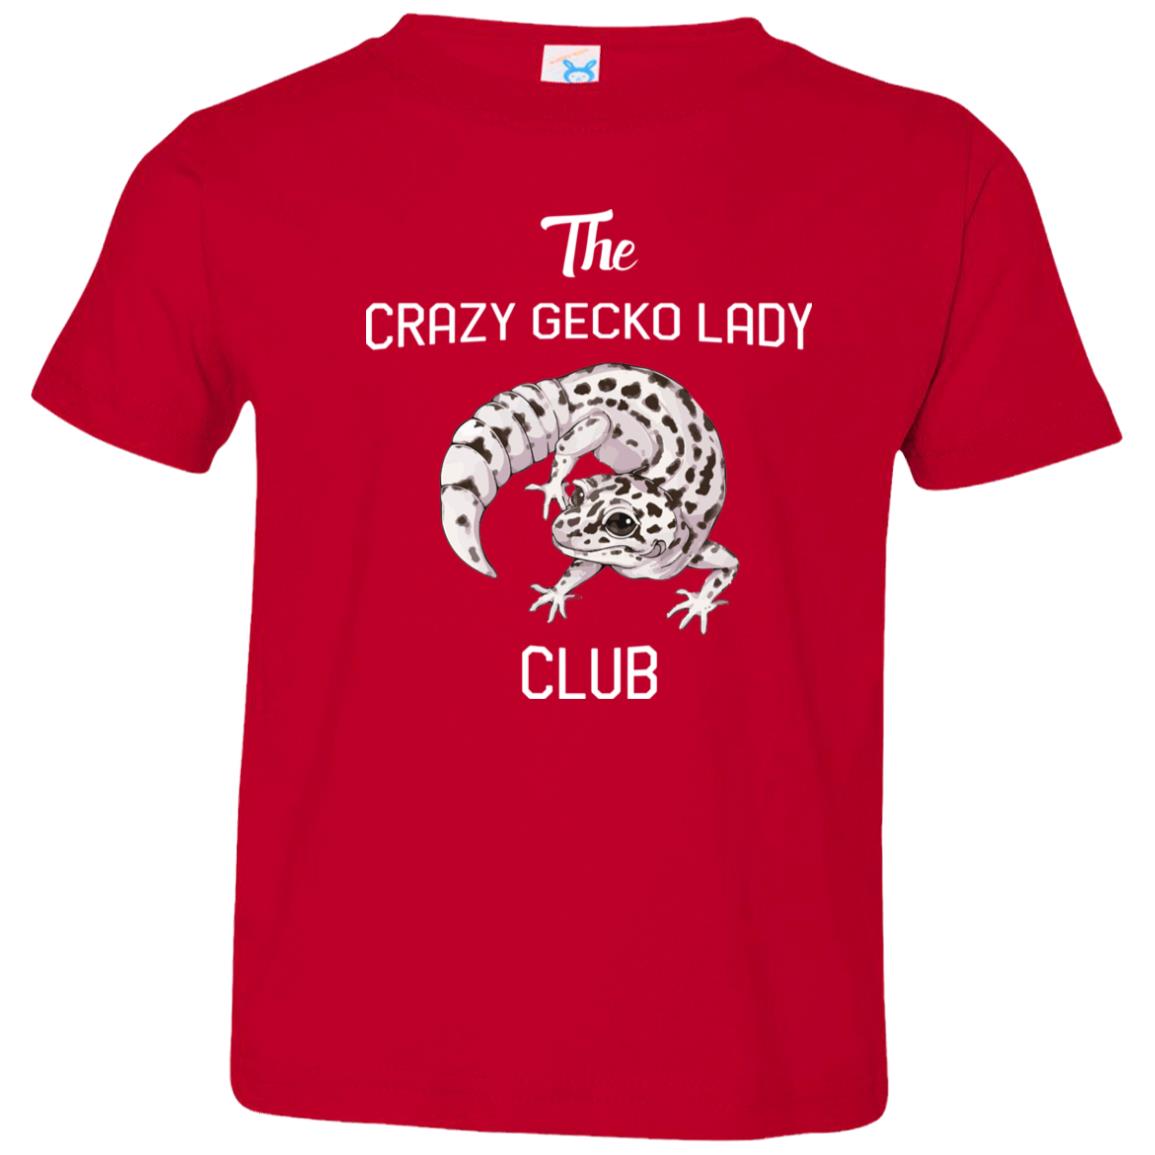 The Crazy Gecko Lady Club - Toddler T-Shirt